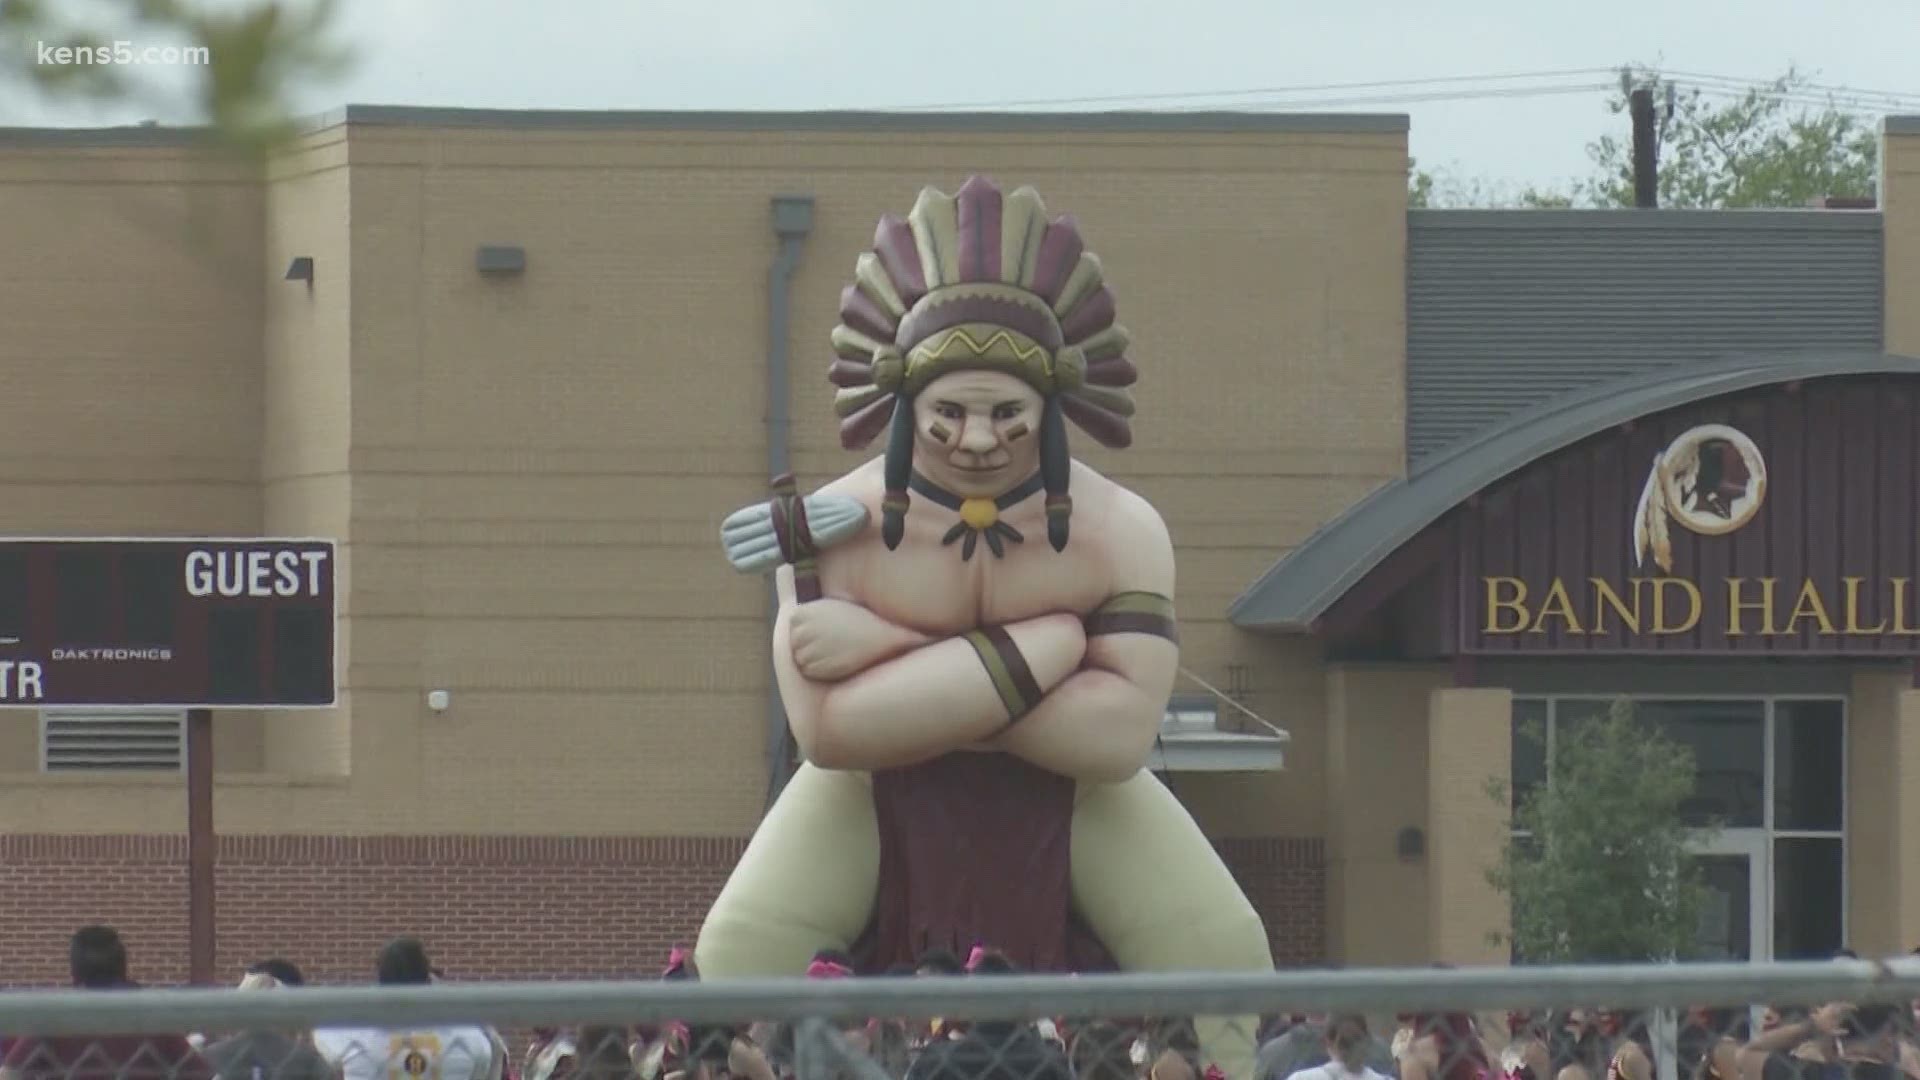 For decades the mascots for schools like Jourdanton and Harlandale have been defended as a symbol of honor, but many disagree.